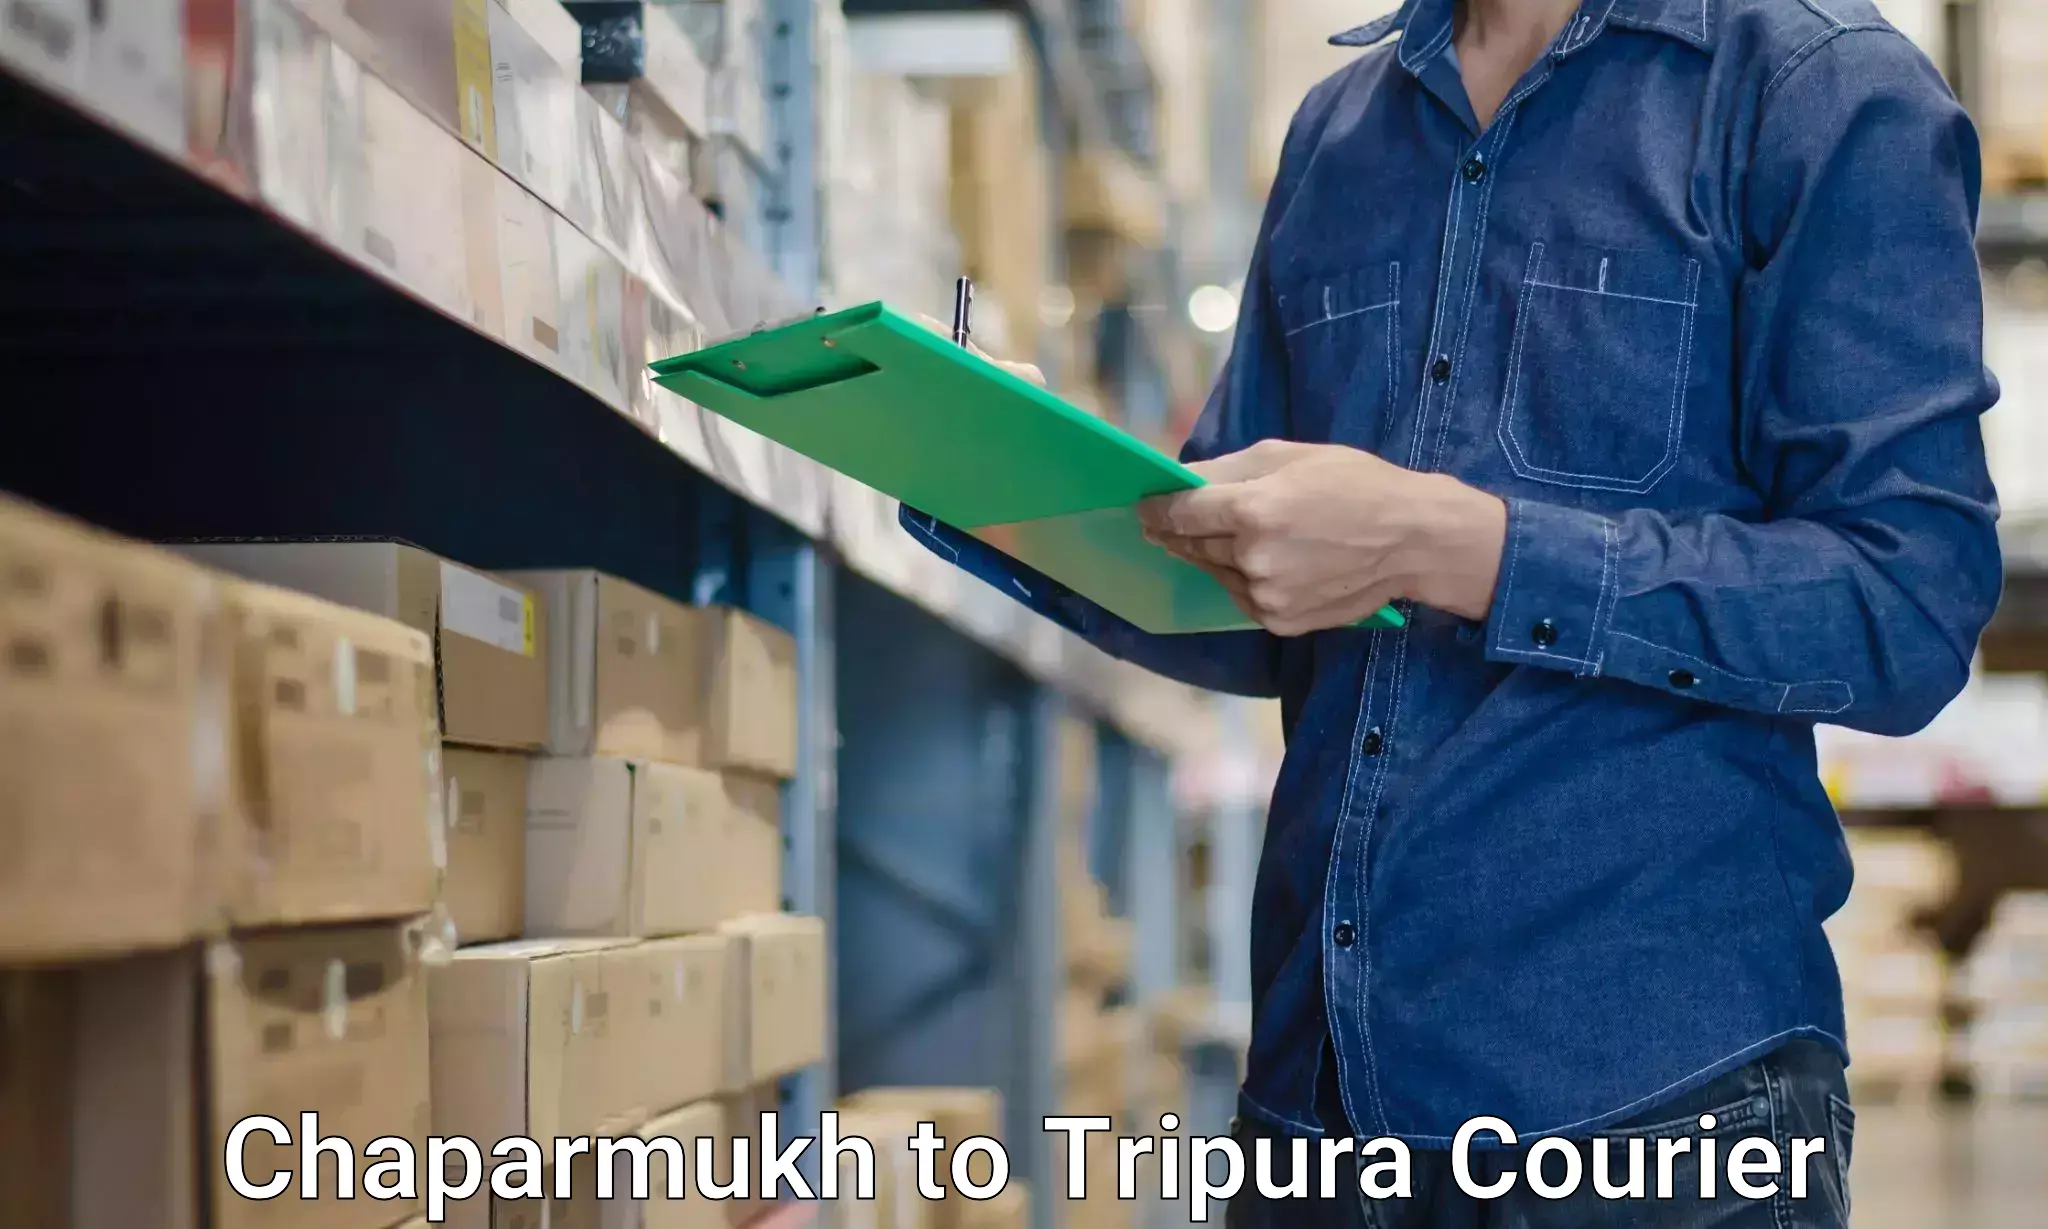 Furniture moving services Chaparmukh to Udaipur Tripura